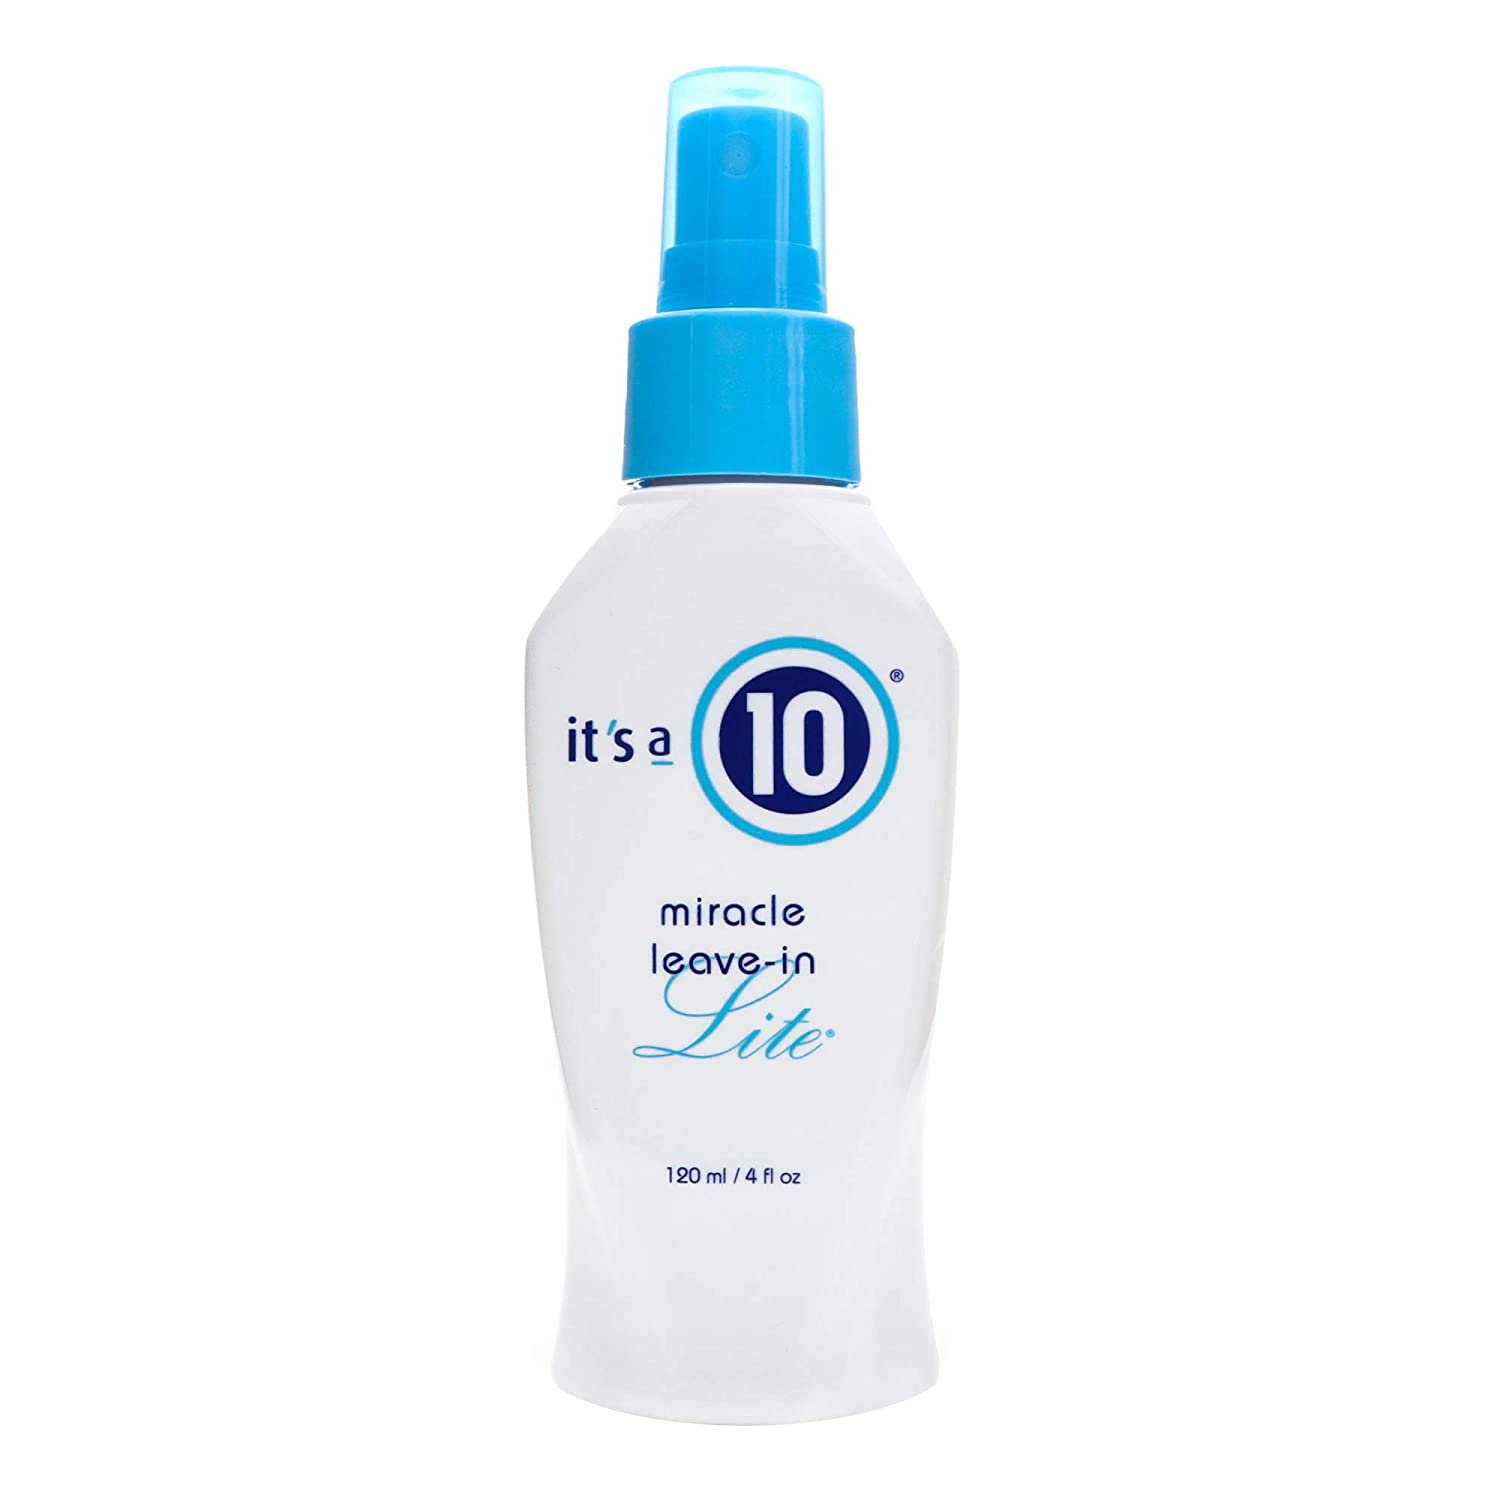 Its a 10 Leave-In, Miracle, Lite - 10 fl oz